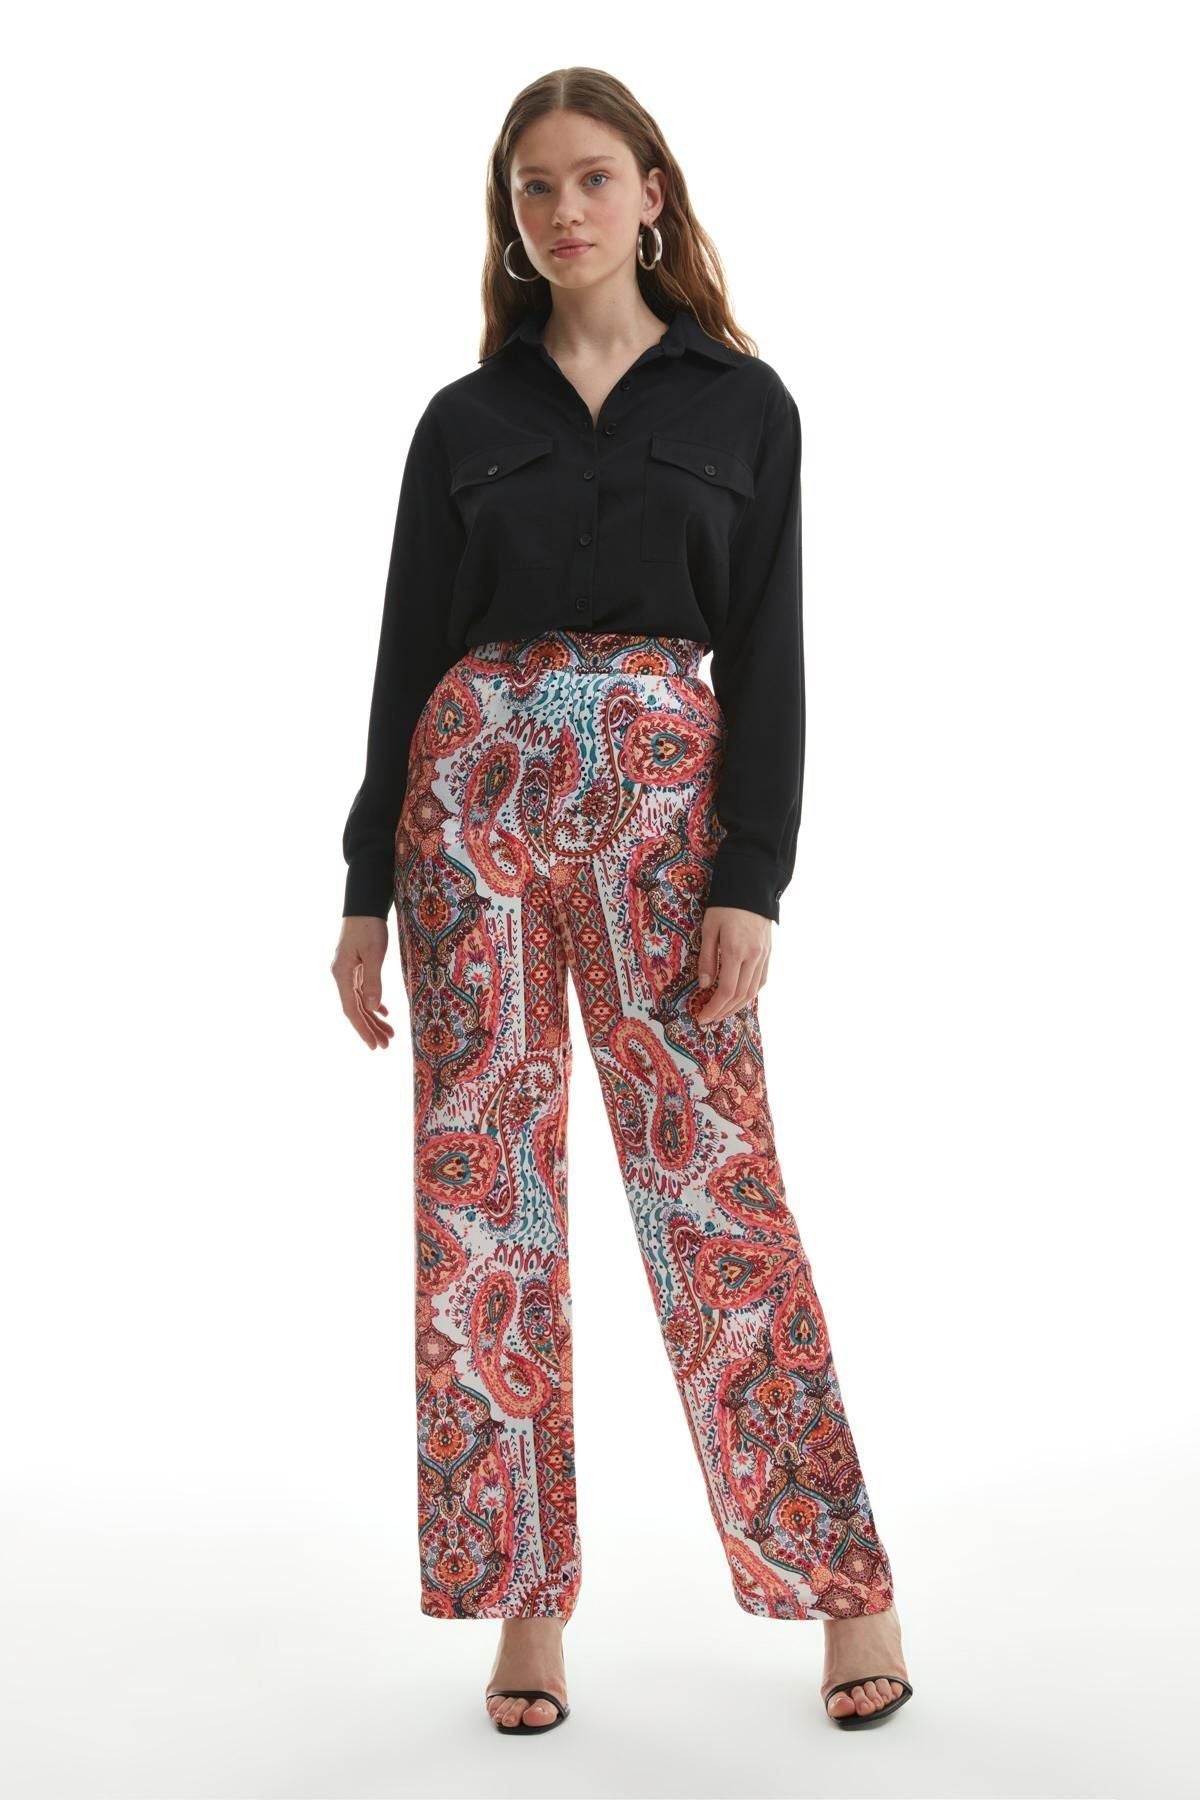 Colorful Patterned Wide Leg Trousers Fuchsia